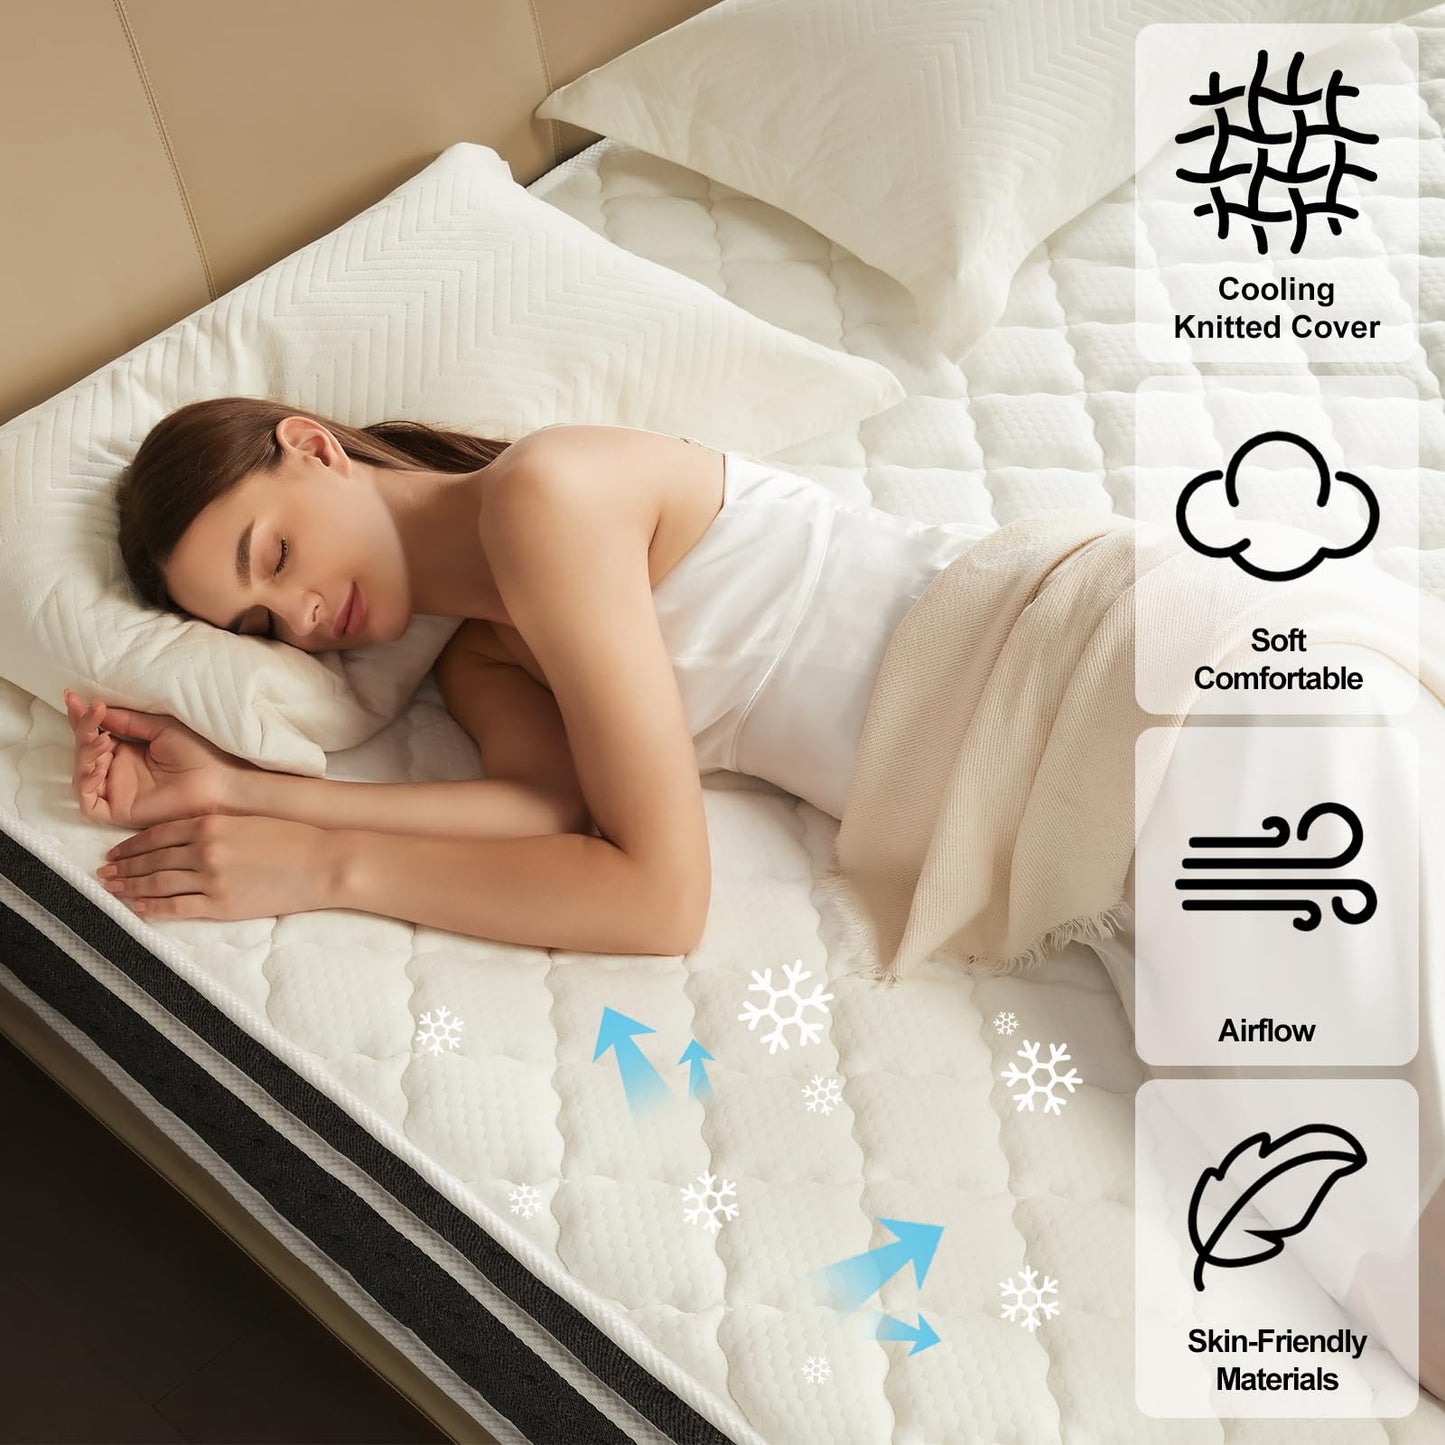 Ablyea King Mattress 12 Inch Hybrid Mattress in a Box with Gel Memory Foam, Individually Wrapped Pocket Coils Innerspring, CertiPUR-US Certified, Pressure Relief & Support, Medium Firm